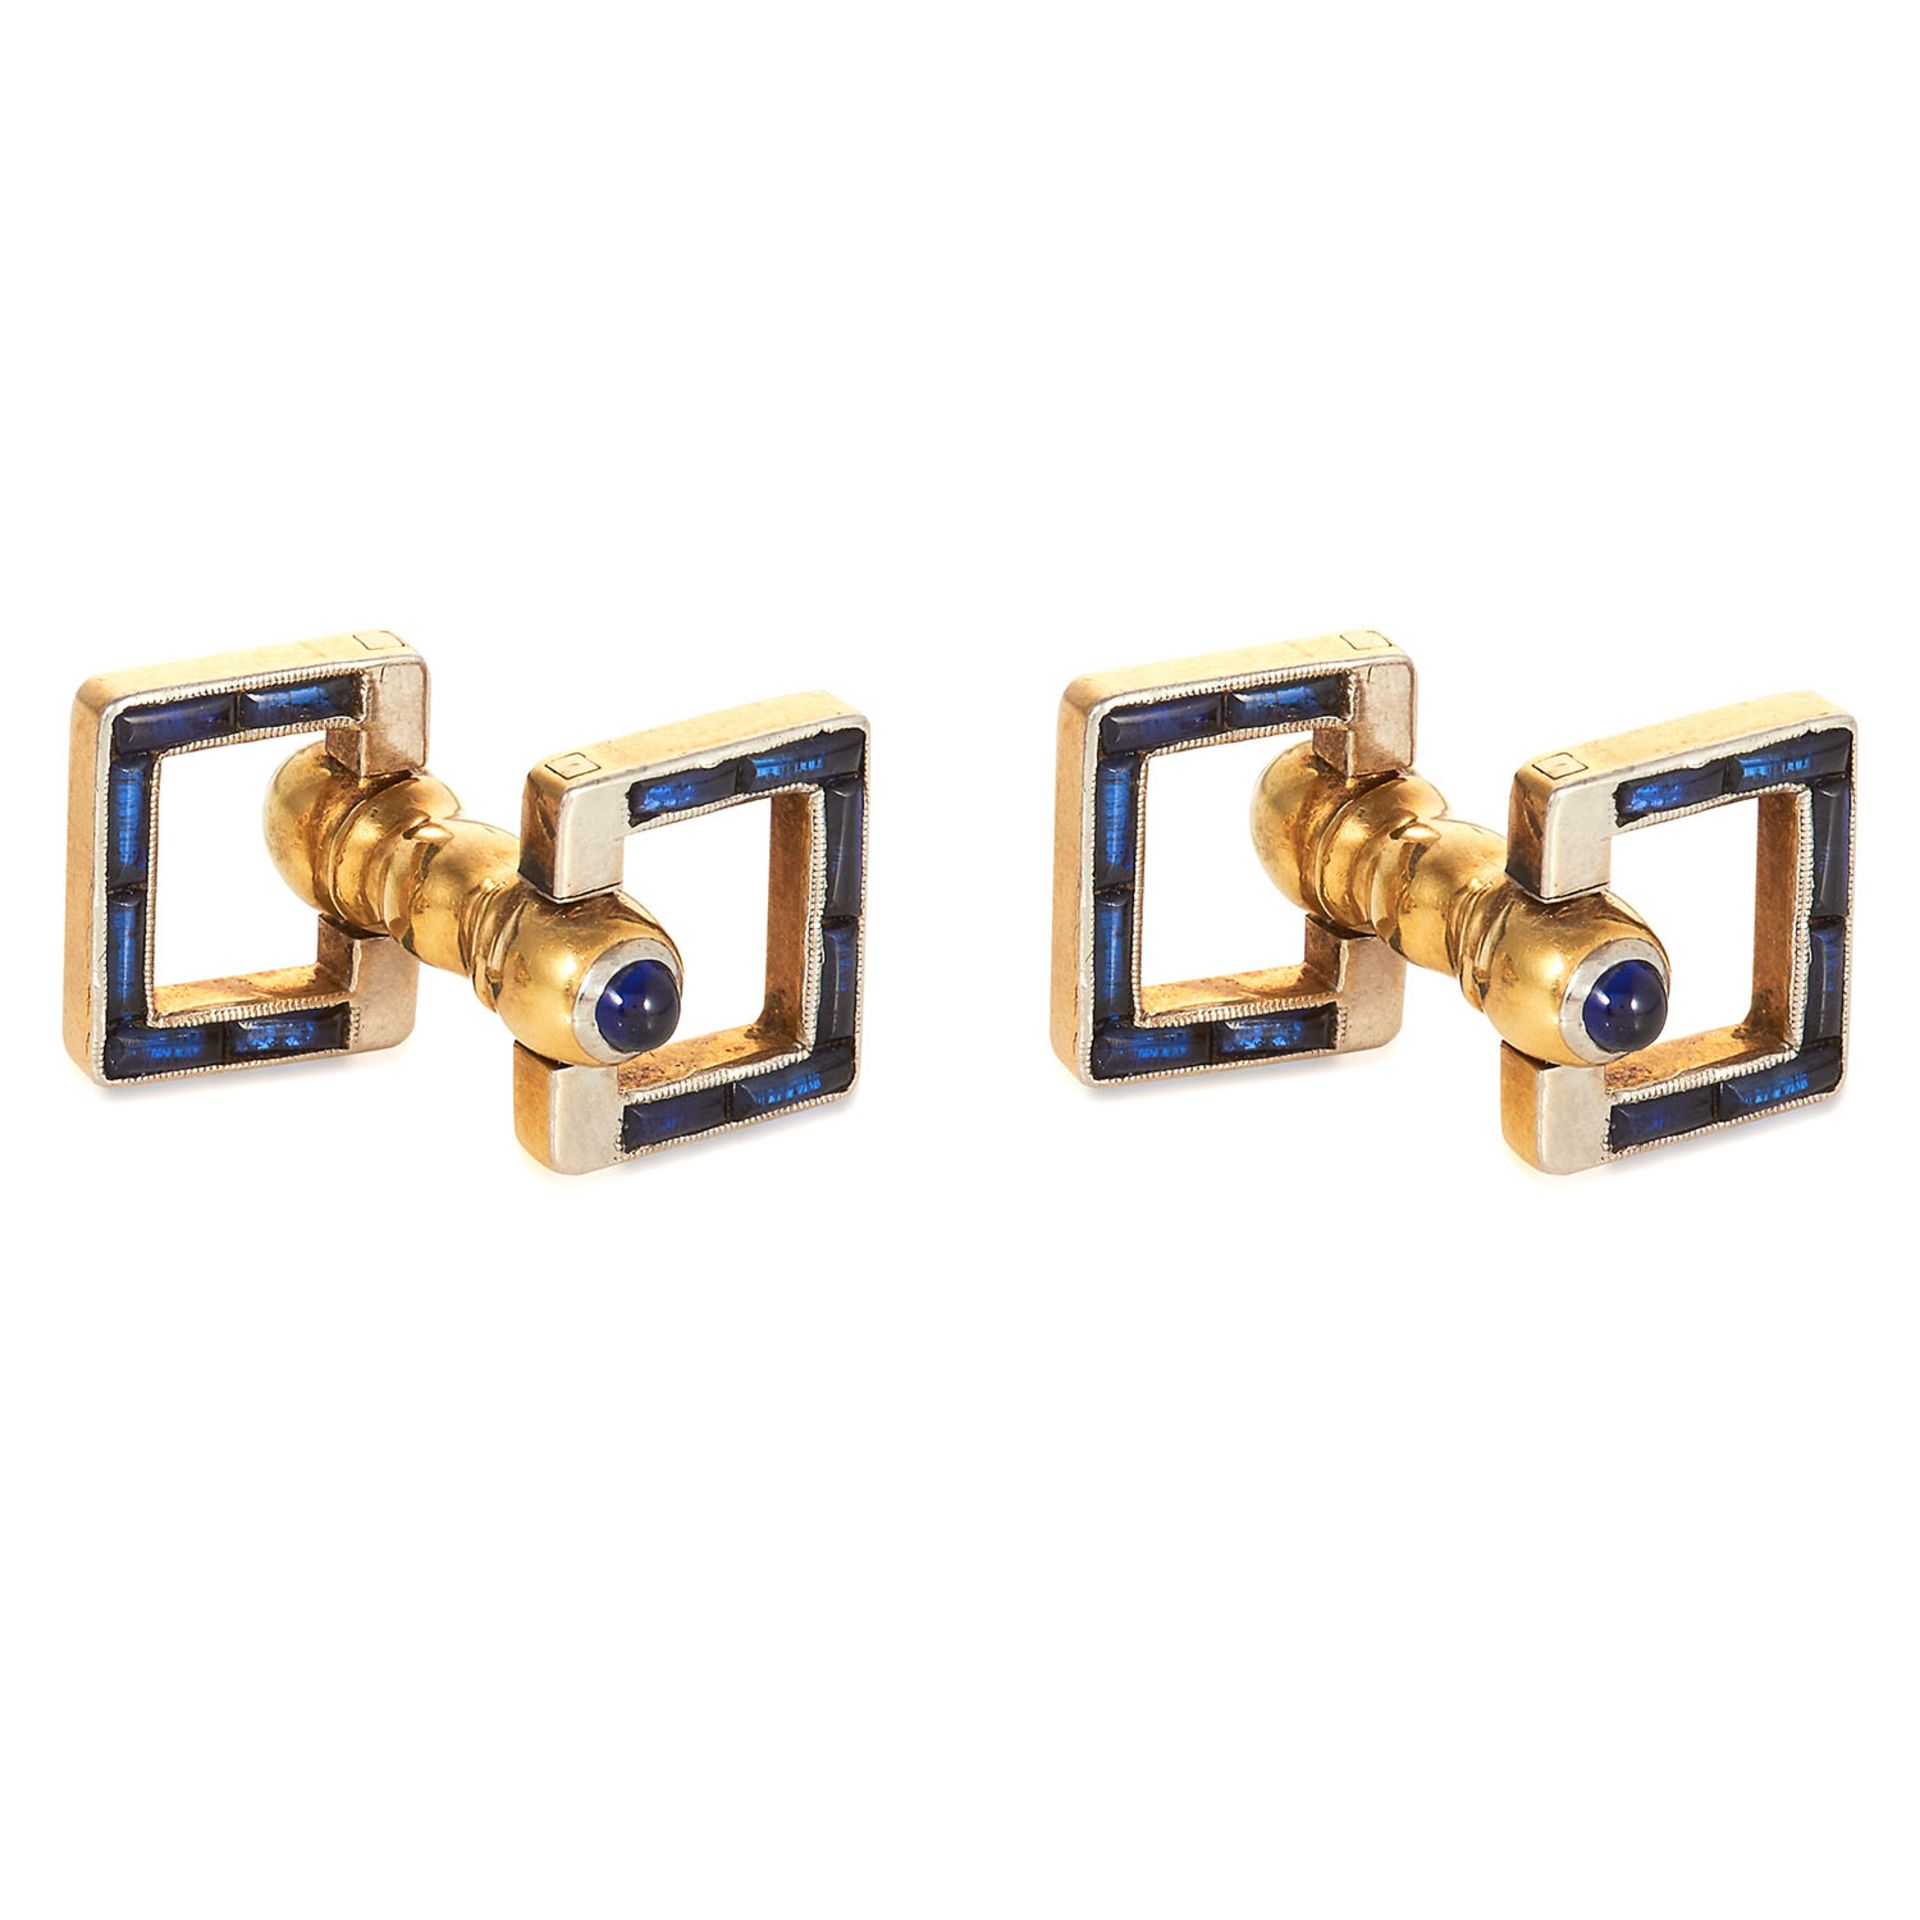 A PAIR OF ANTIQUE SAPPHIRE CUFFLINKS in yellow gold, jewelled with cabochon sapphires in square